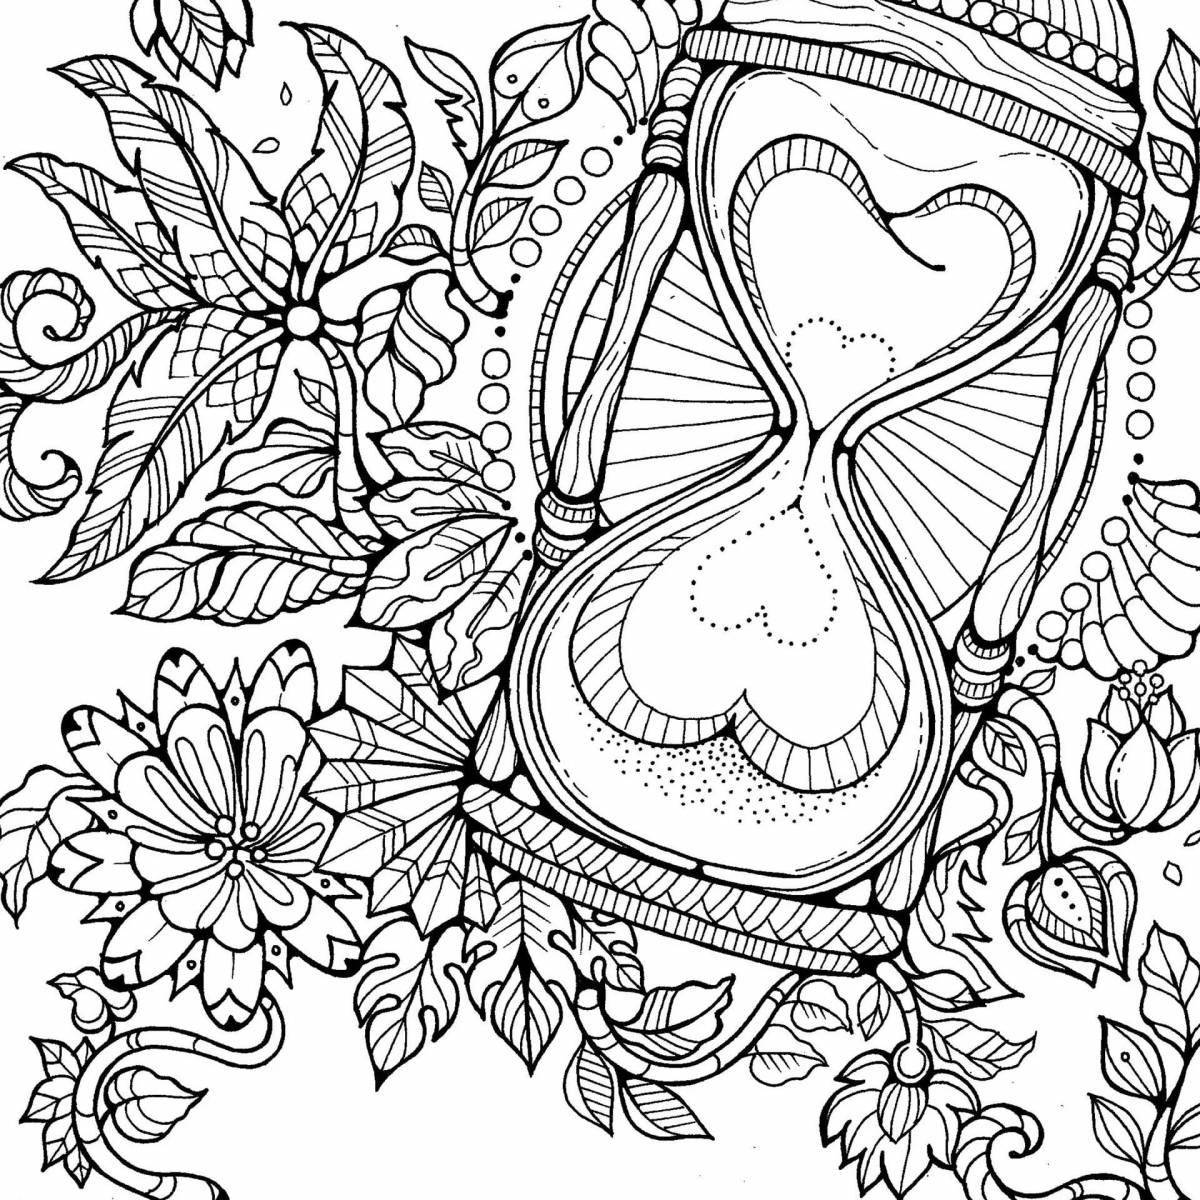 Fairytale coloring book coloring book